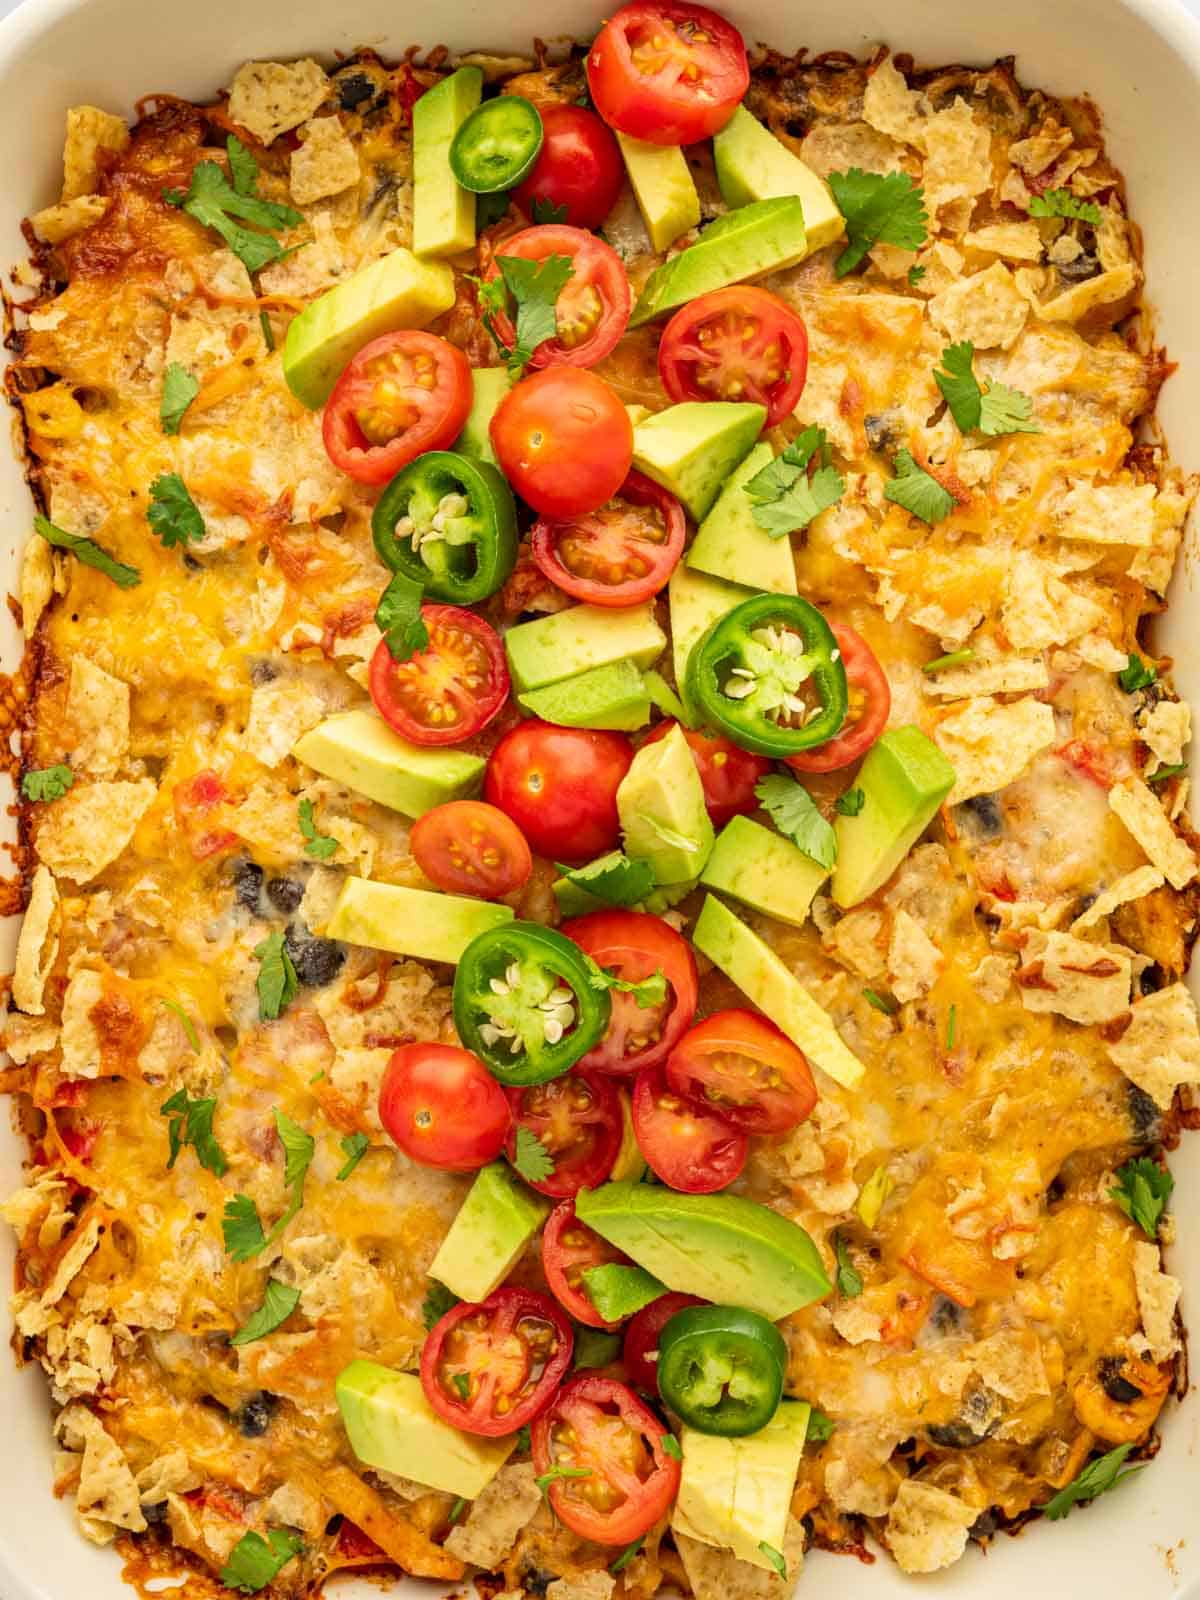 Top the baked casserole with fresh tomatoes, jalapeno and avocade.